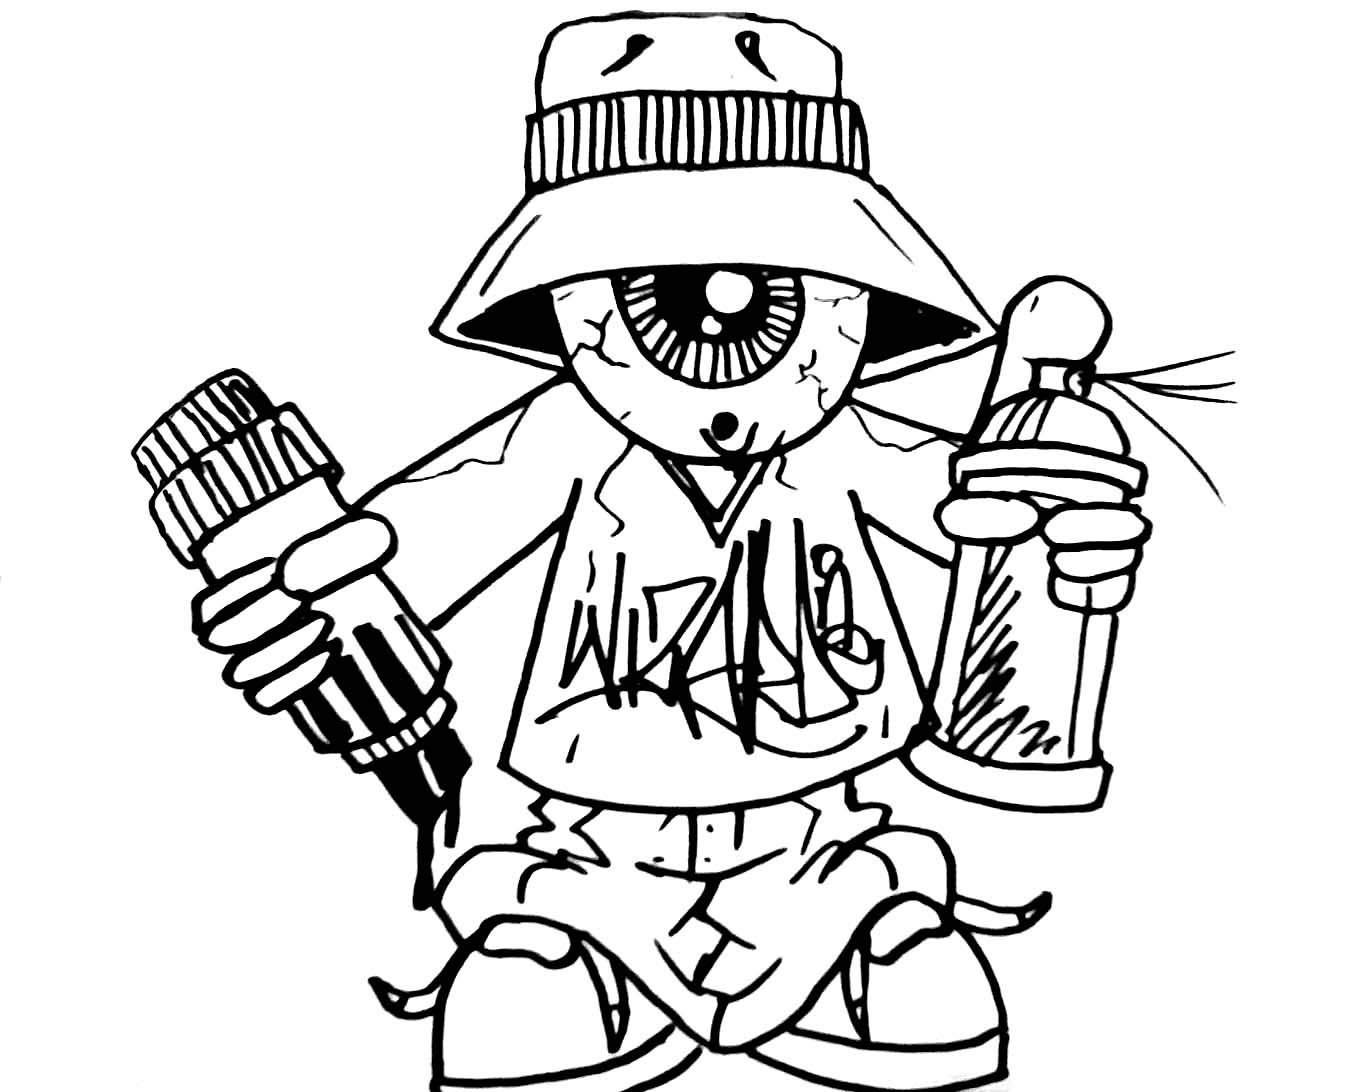 Download Graffiti Coloring Pages For Teens And Adults Best Coloring Pages For Kids